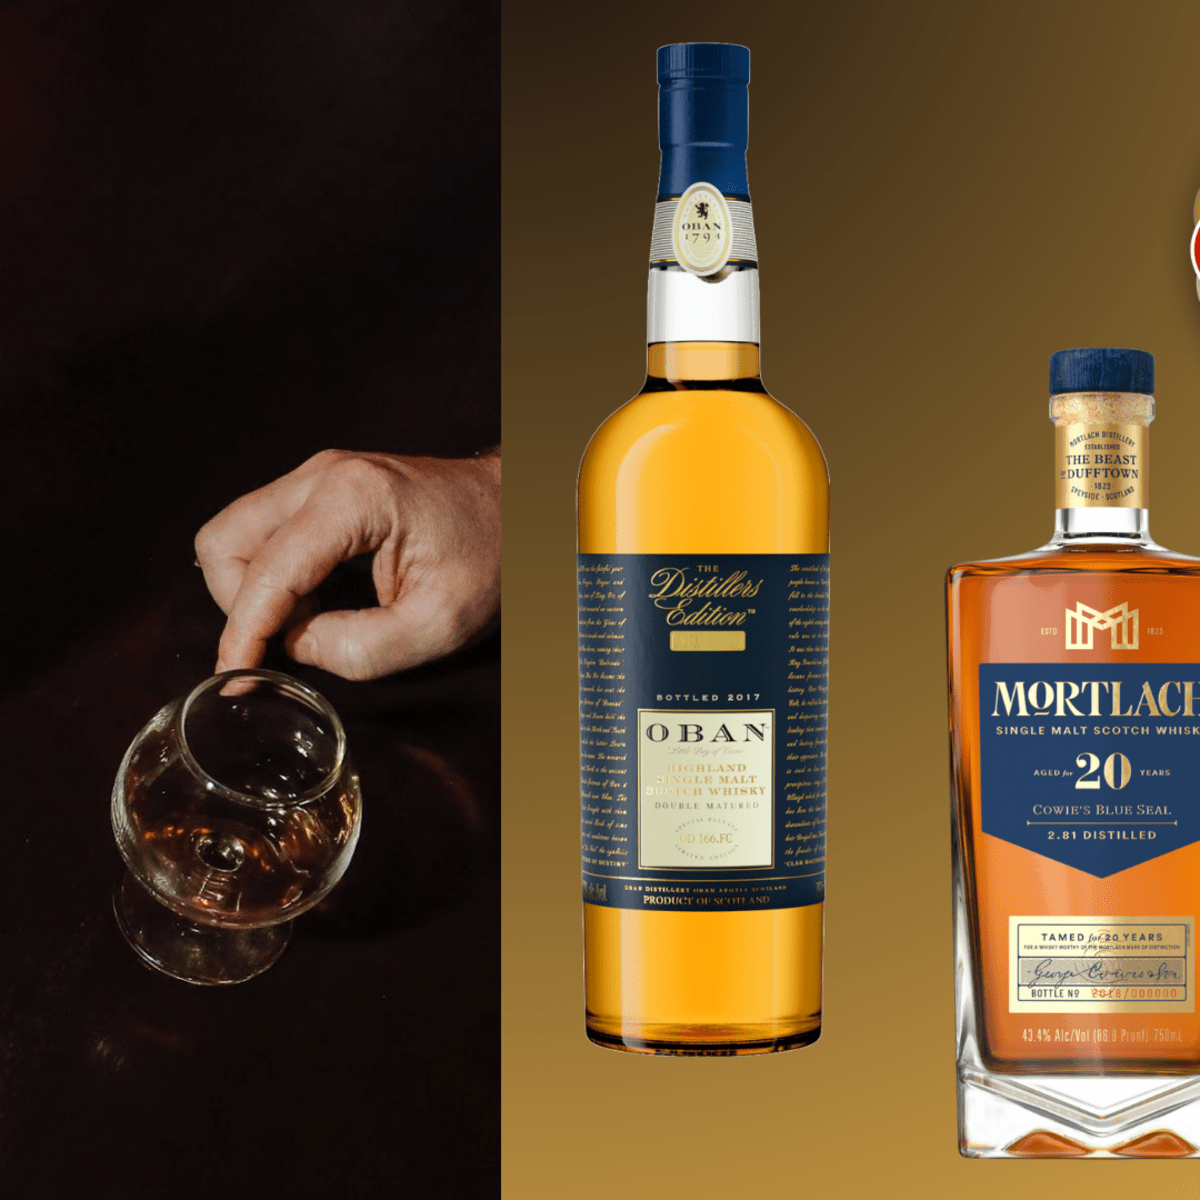 15 Best Scotch Whiskies in 2023, According to Experts - Men's Journal